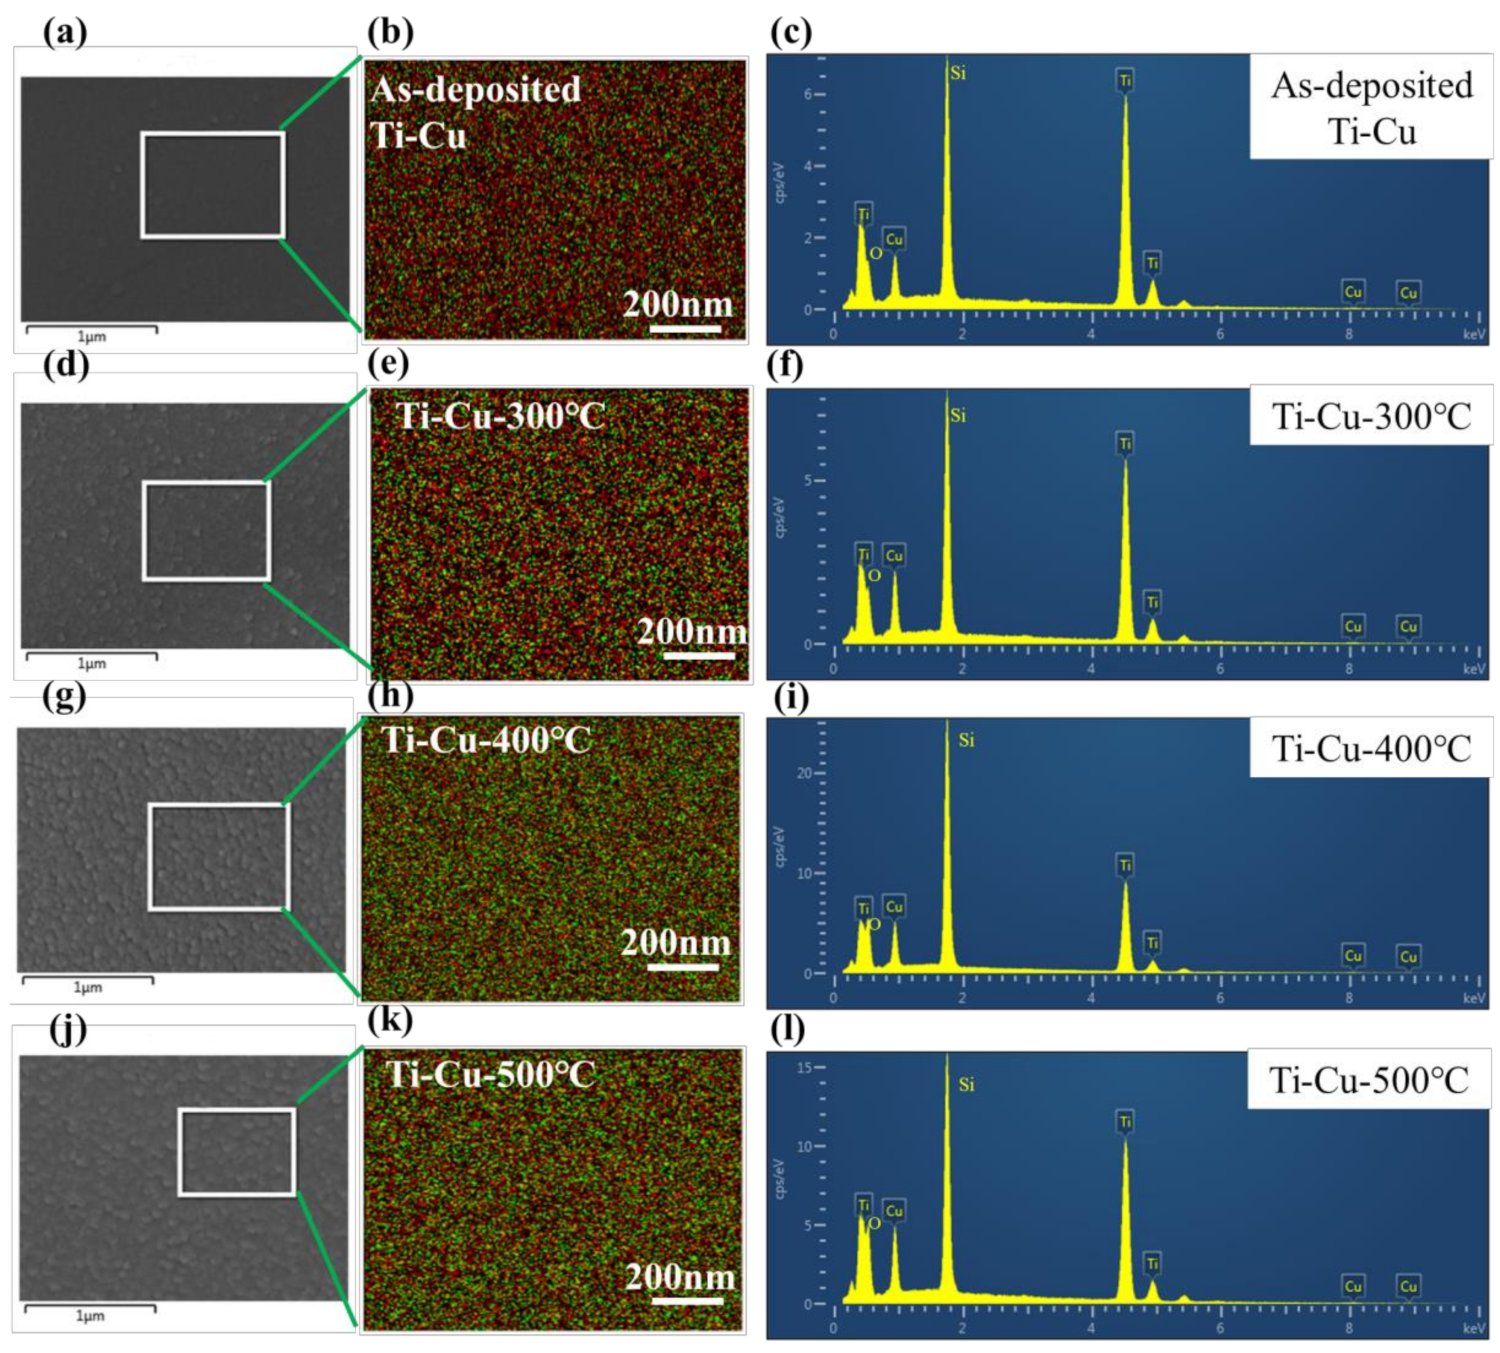 Coatings Free Full Text Ti Cu Coatings Deposited By A Combination Of Hipims And Dc Magnetron Sputtering The Role Of Vacuum Annealing On Cu Diffusion Microstructure And Corrosion Resistance Html